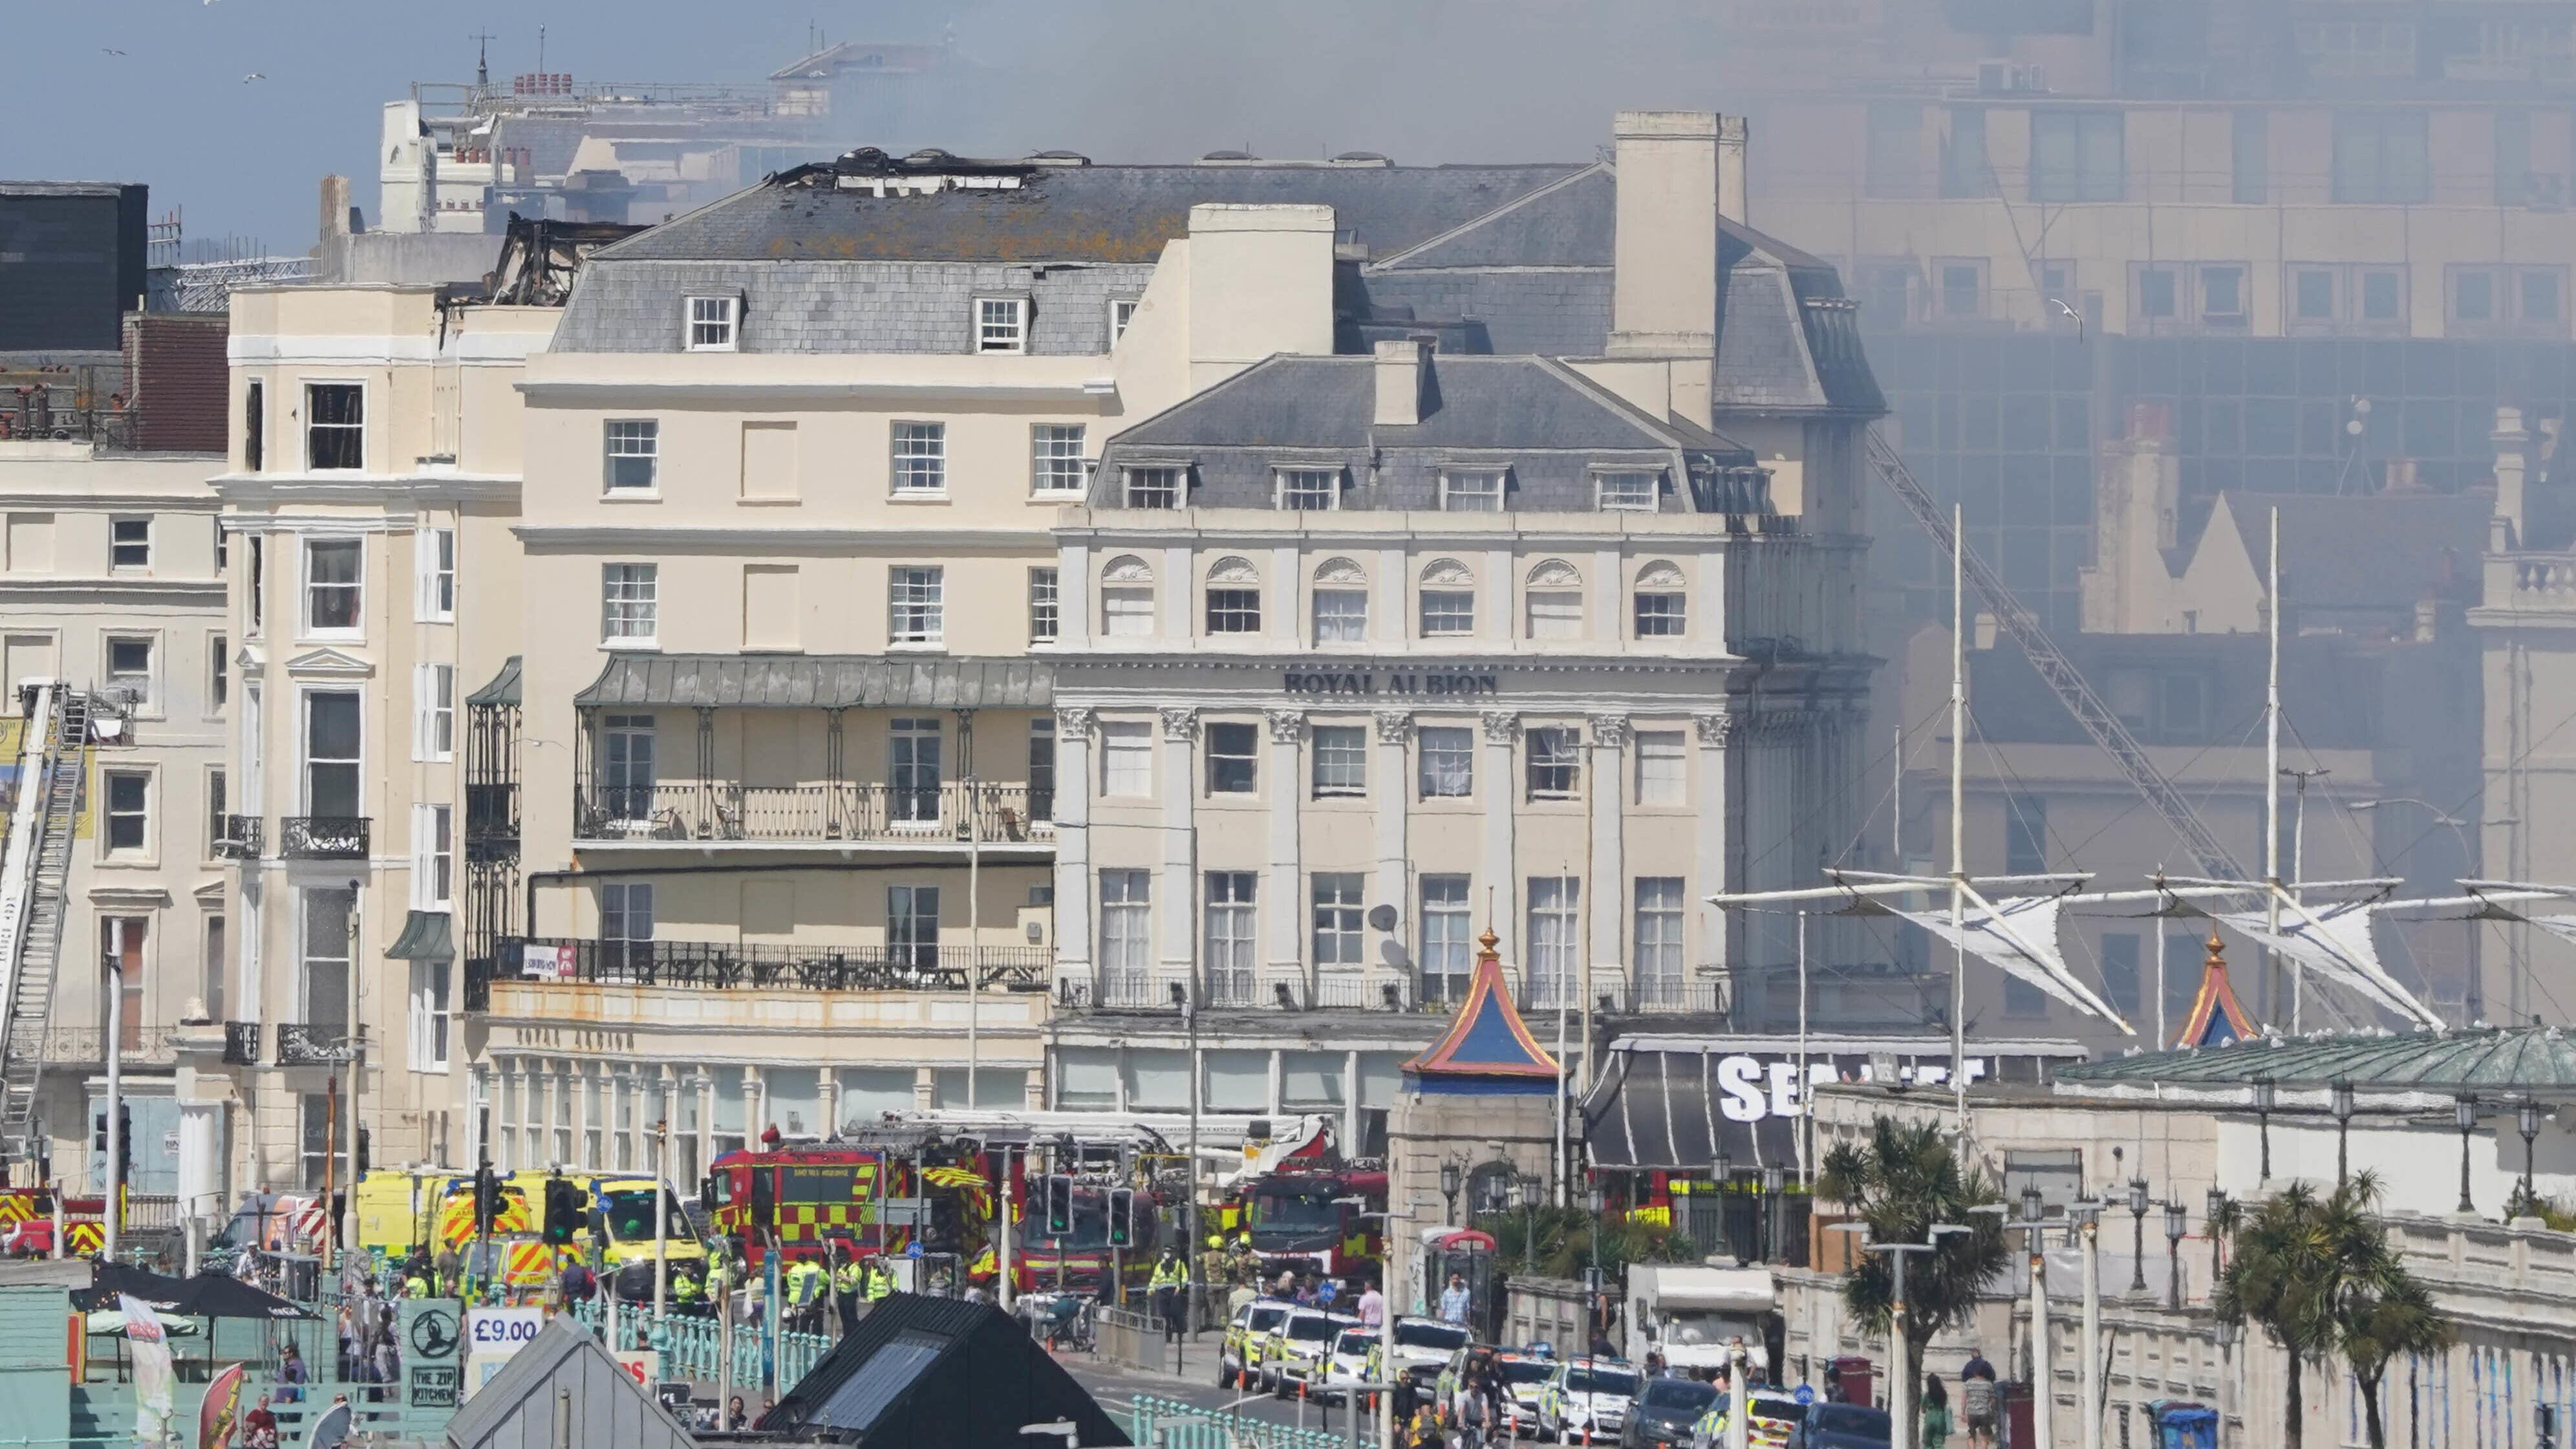 A fire broke out at the Royal Albion Hotel on Saturday evening (Gareth Fuller/PA)